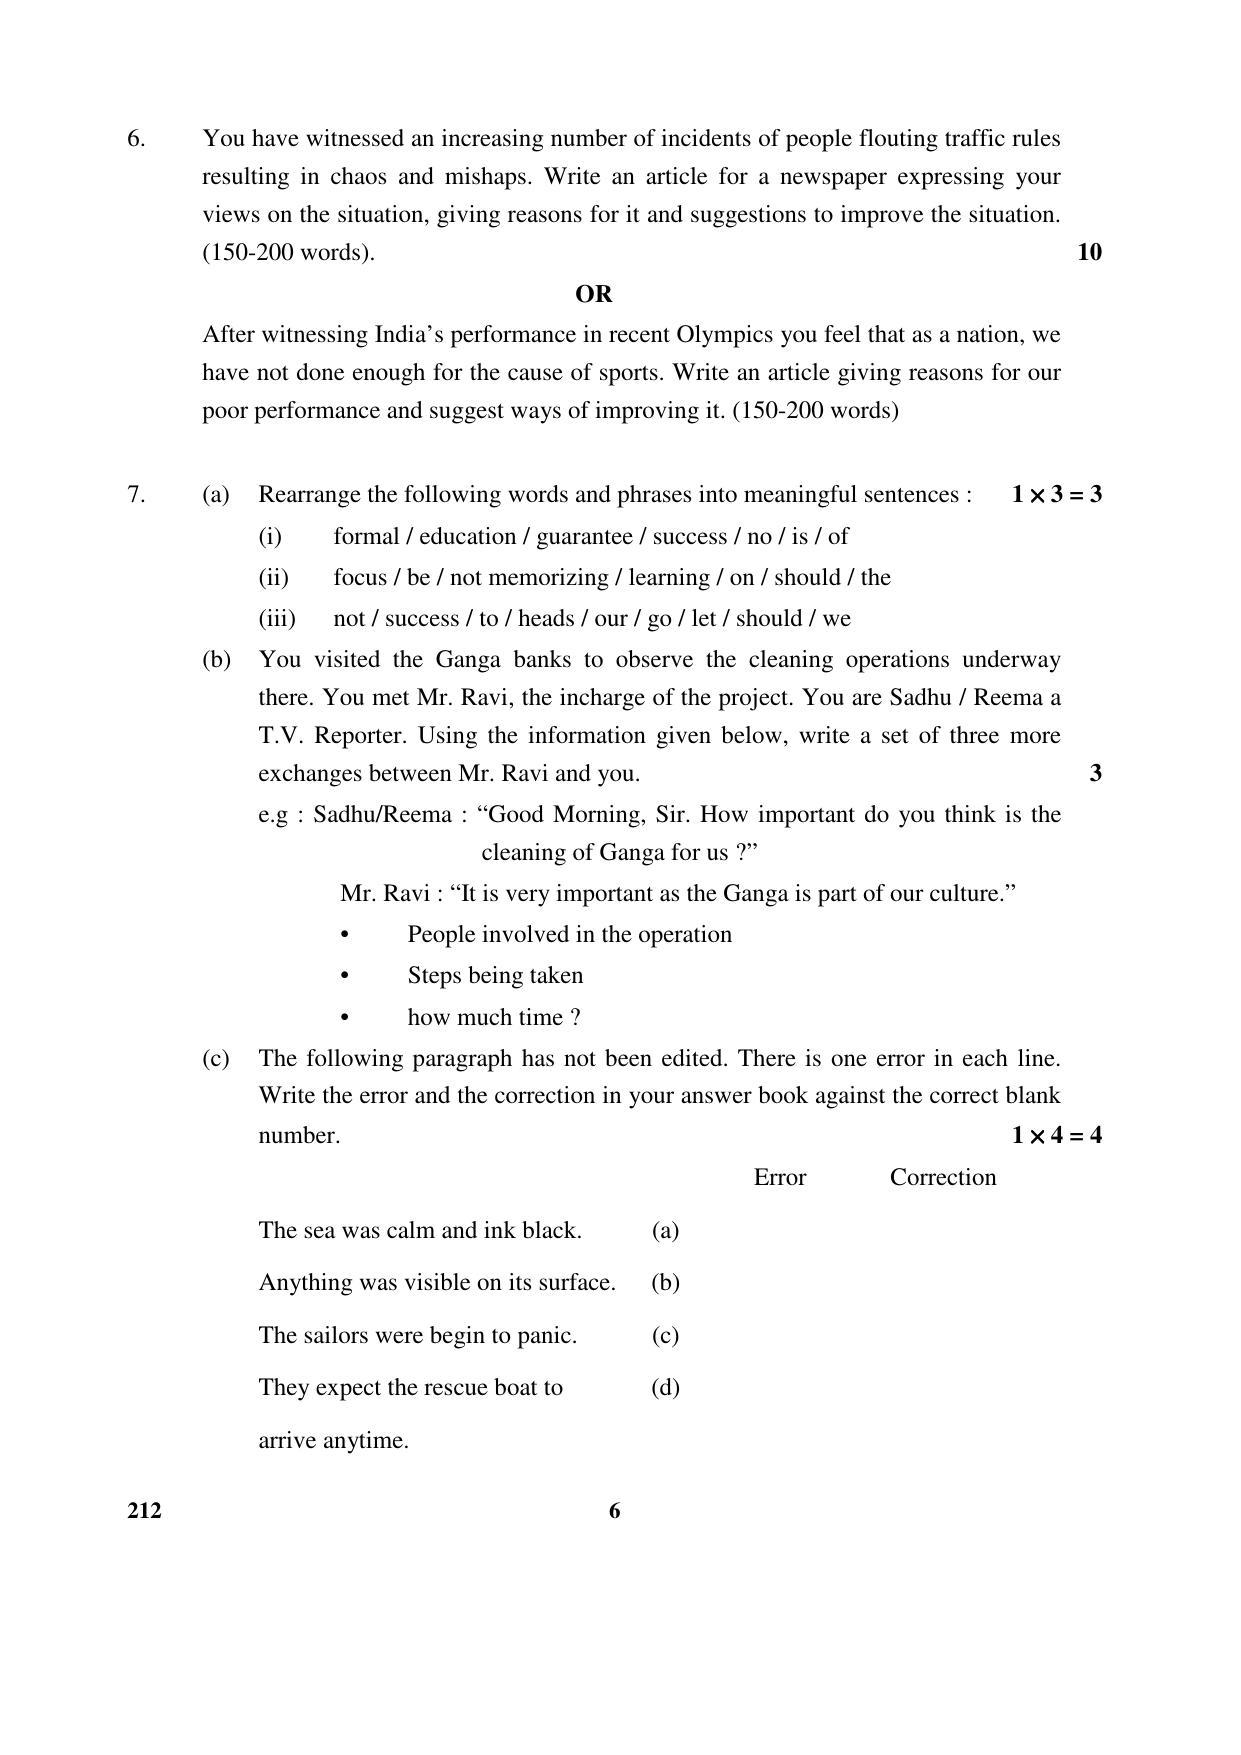 CBSE Class 12 212 _English (Elective) 2017 Question Paper - Page 6